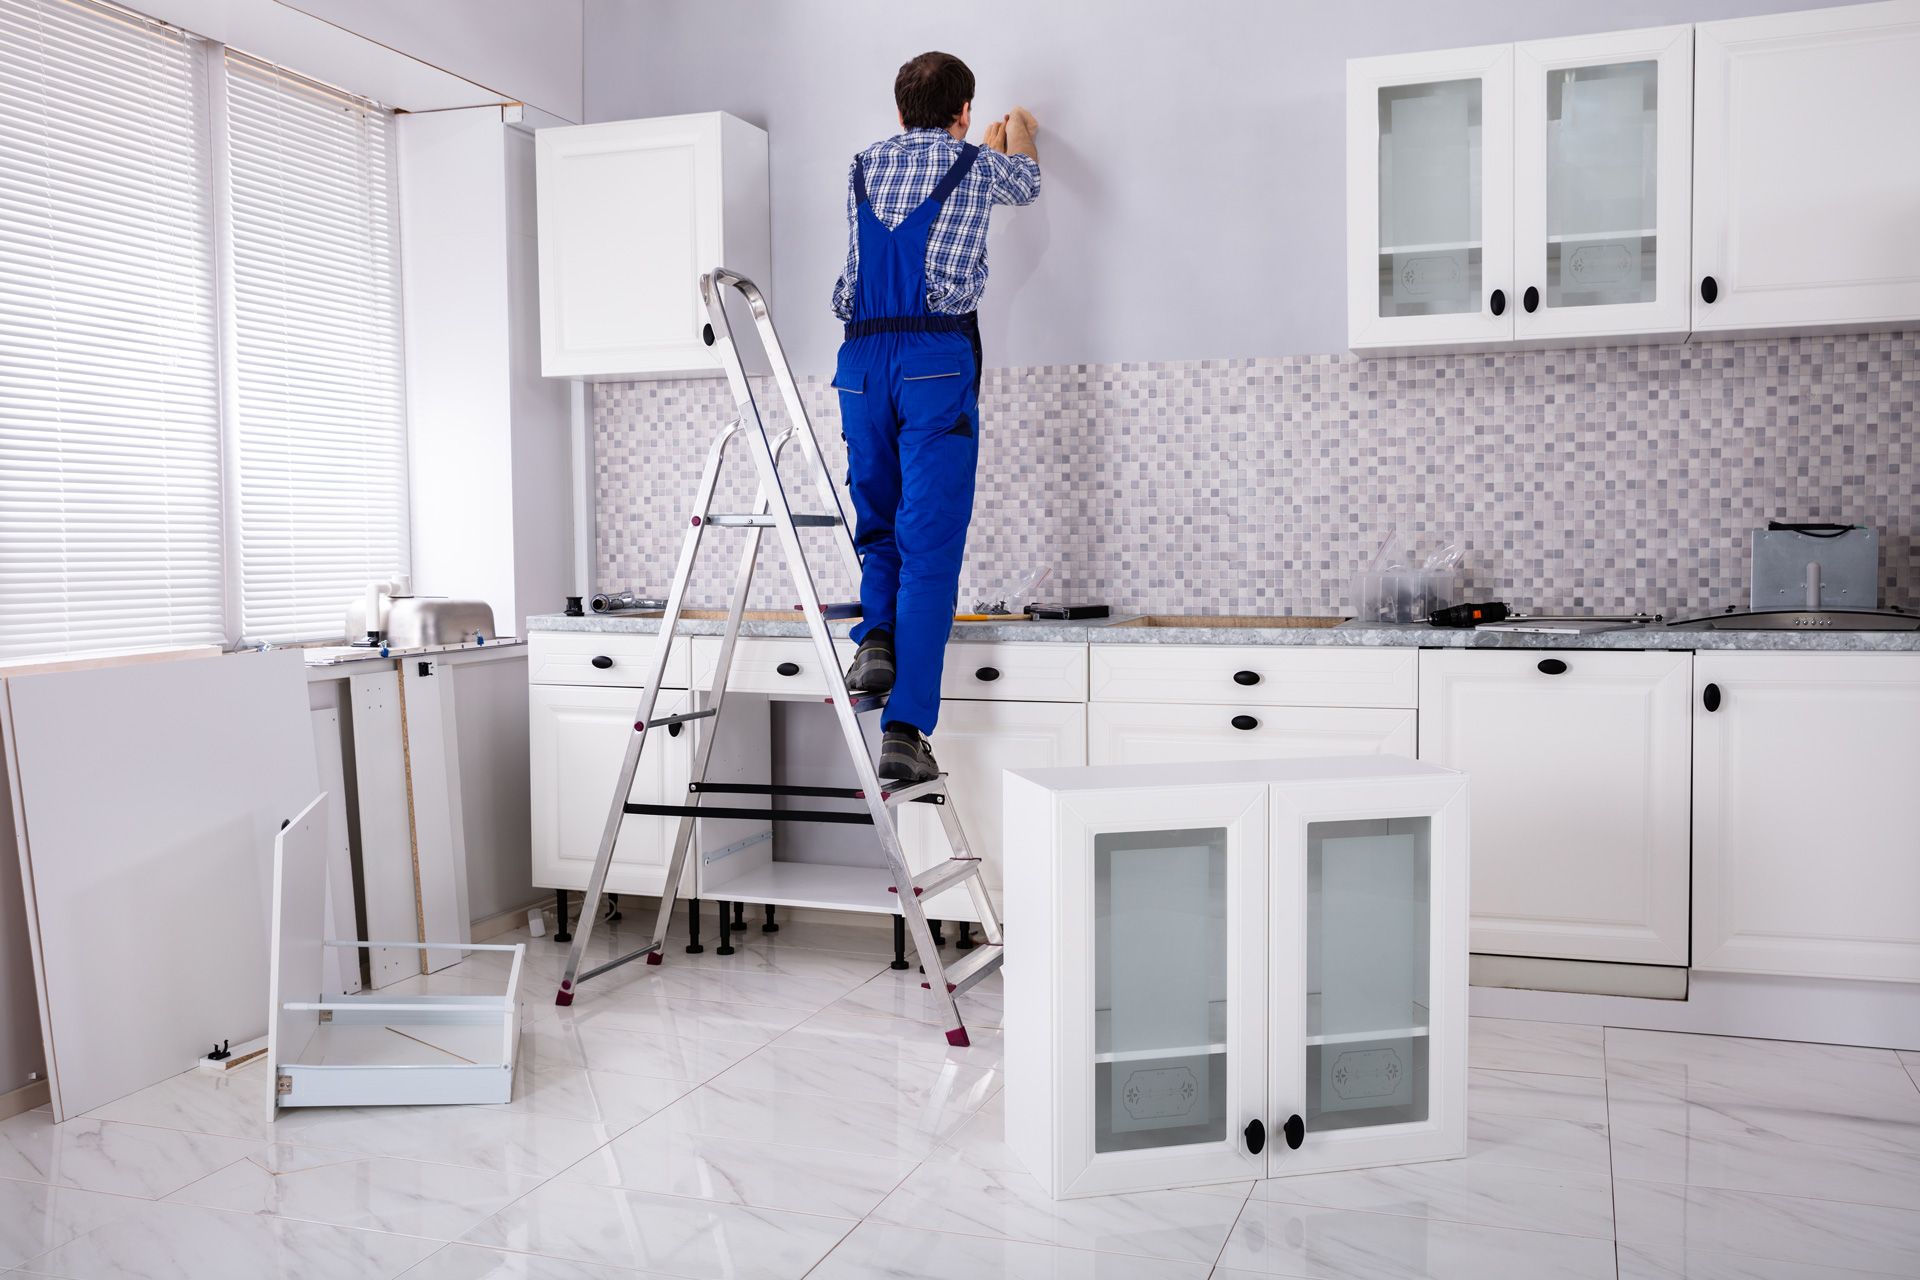 A man is standing on a ladder in a kitchen.